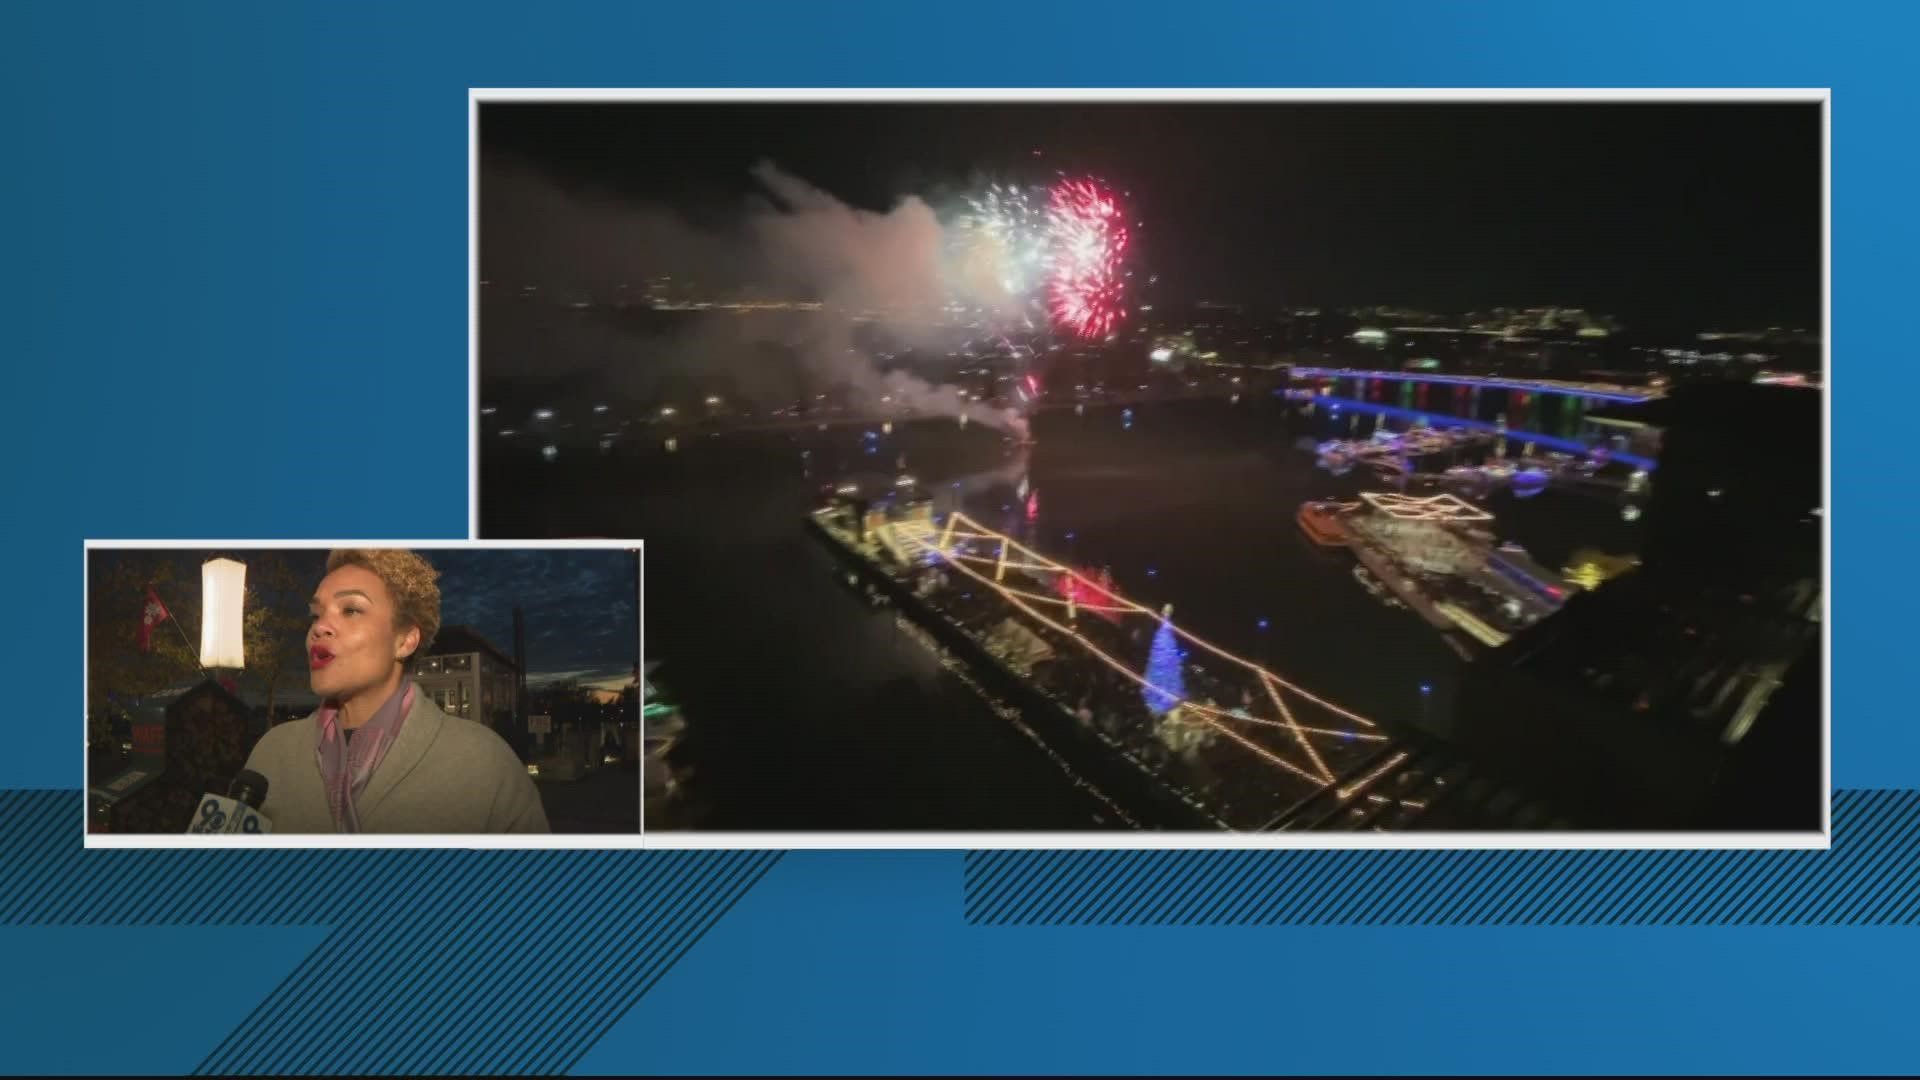 You can get in the holiday spirit at the Wharf in Southwest DC. Happening tomorrow night is the Holiday Boat Parade.